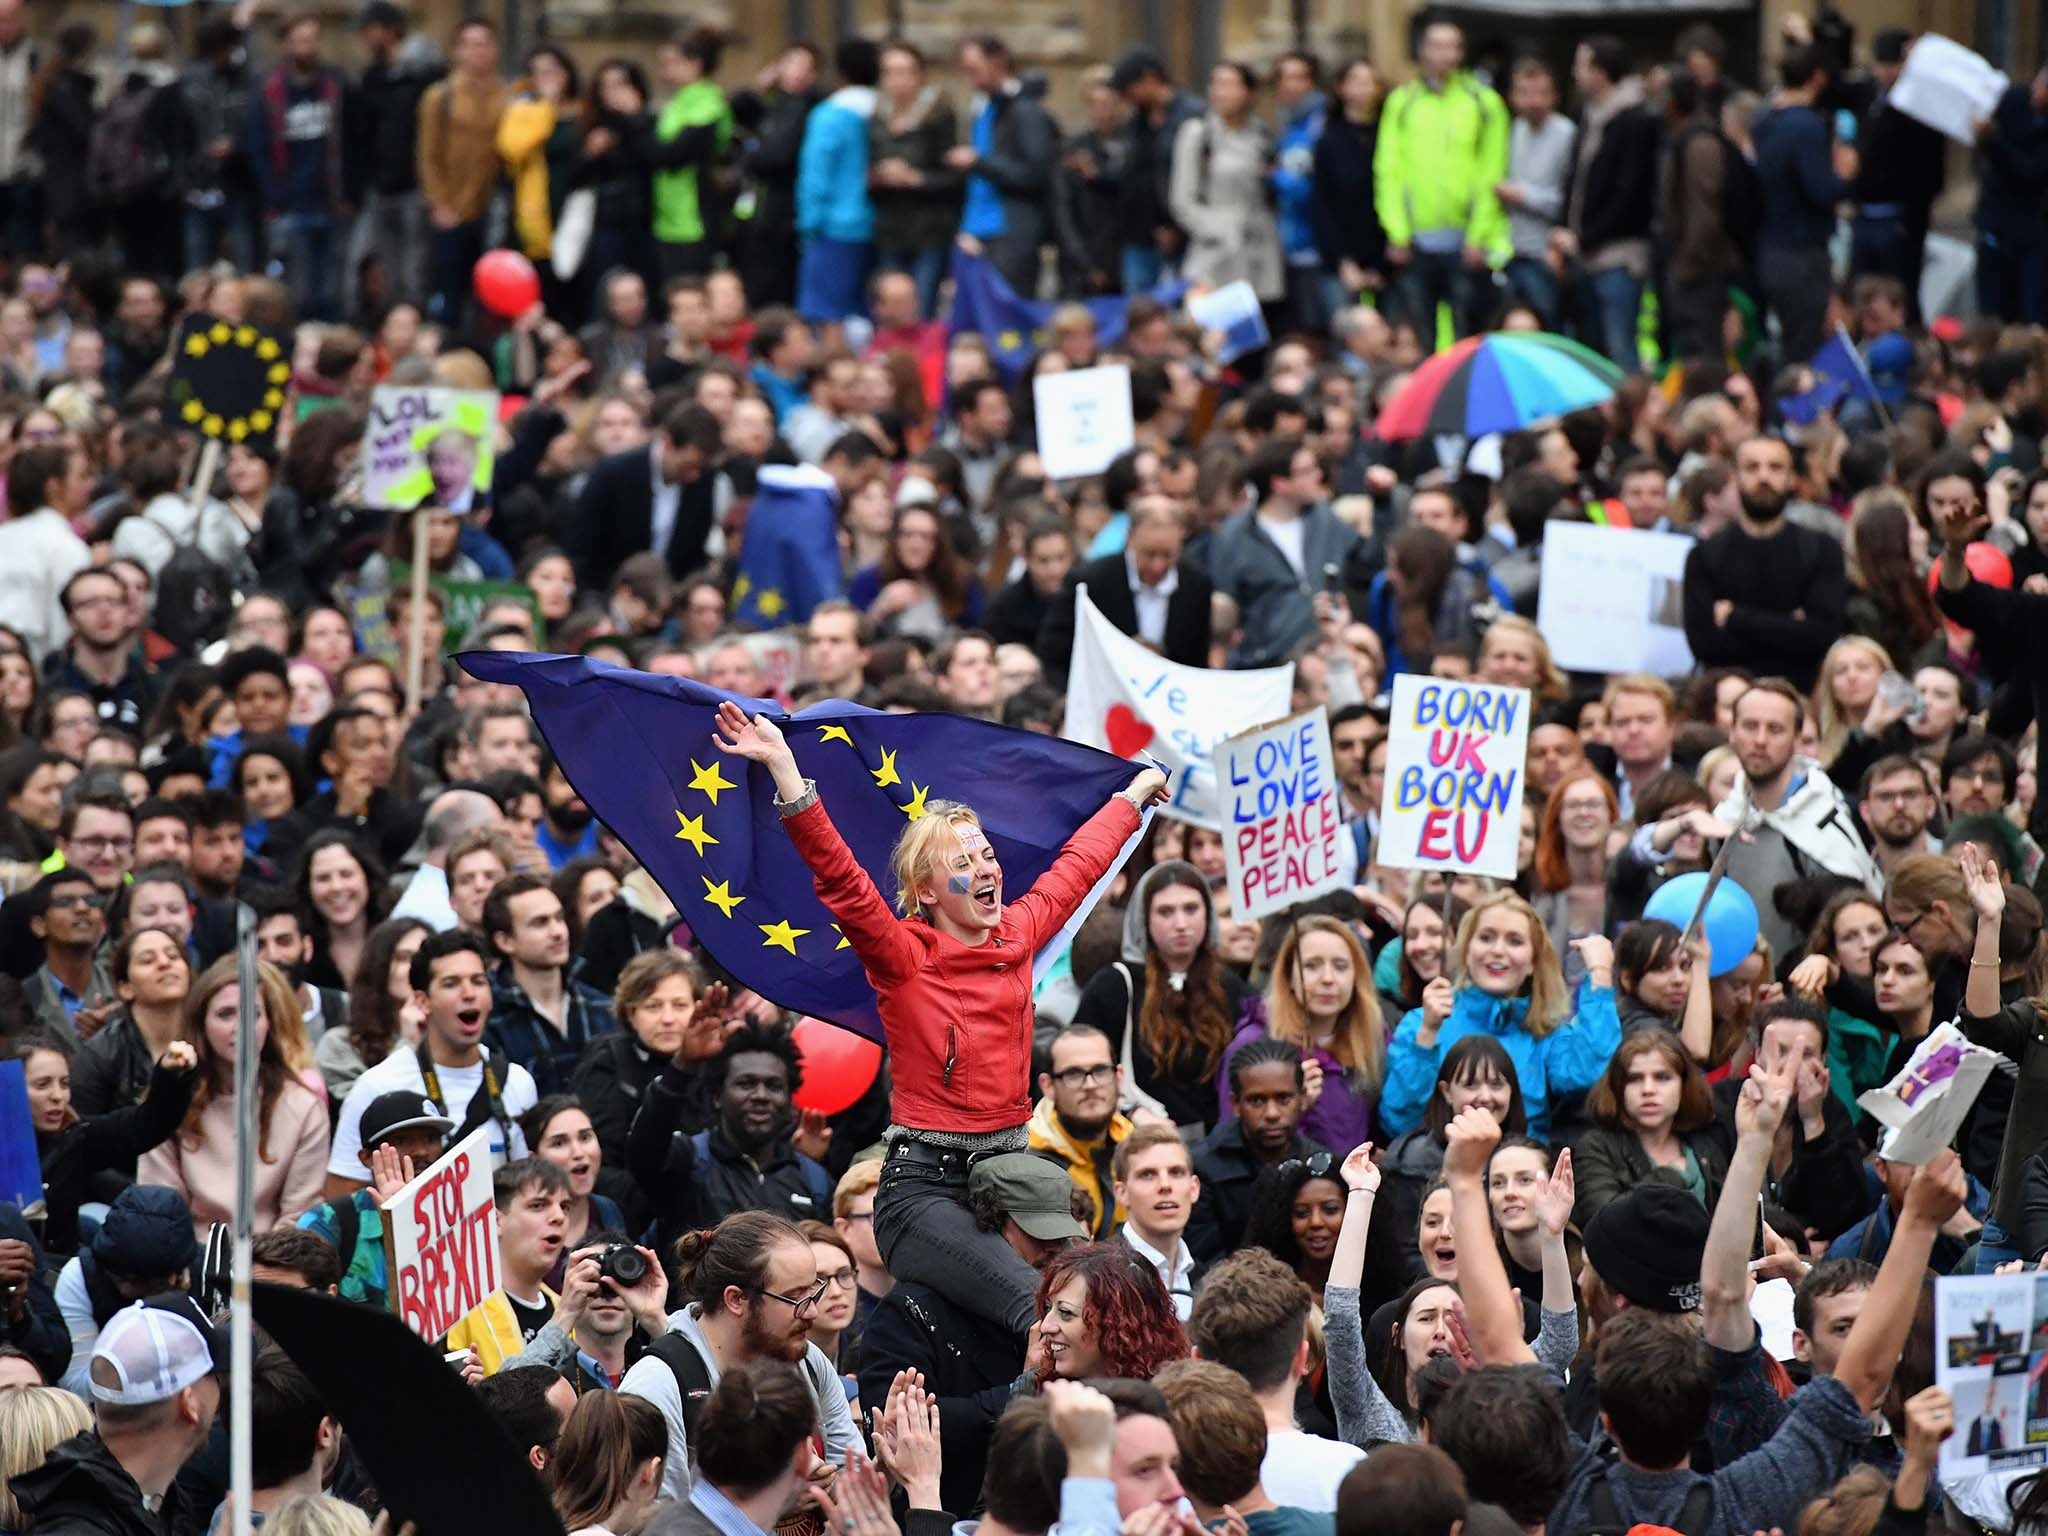 Protesters demonstrate against the EU referendum result outside Parliament in June